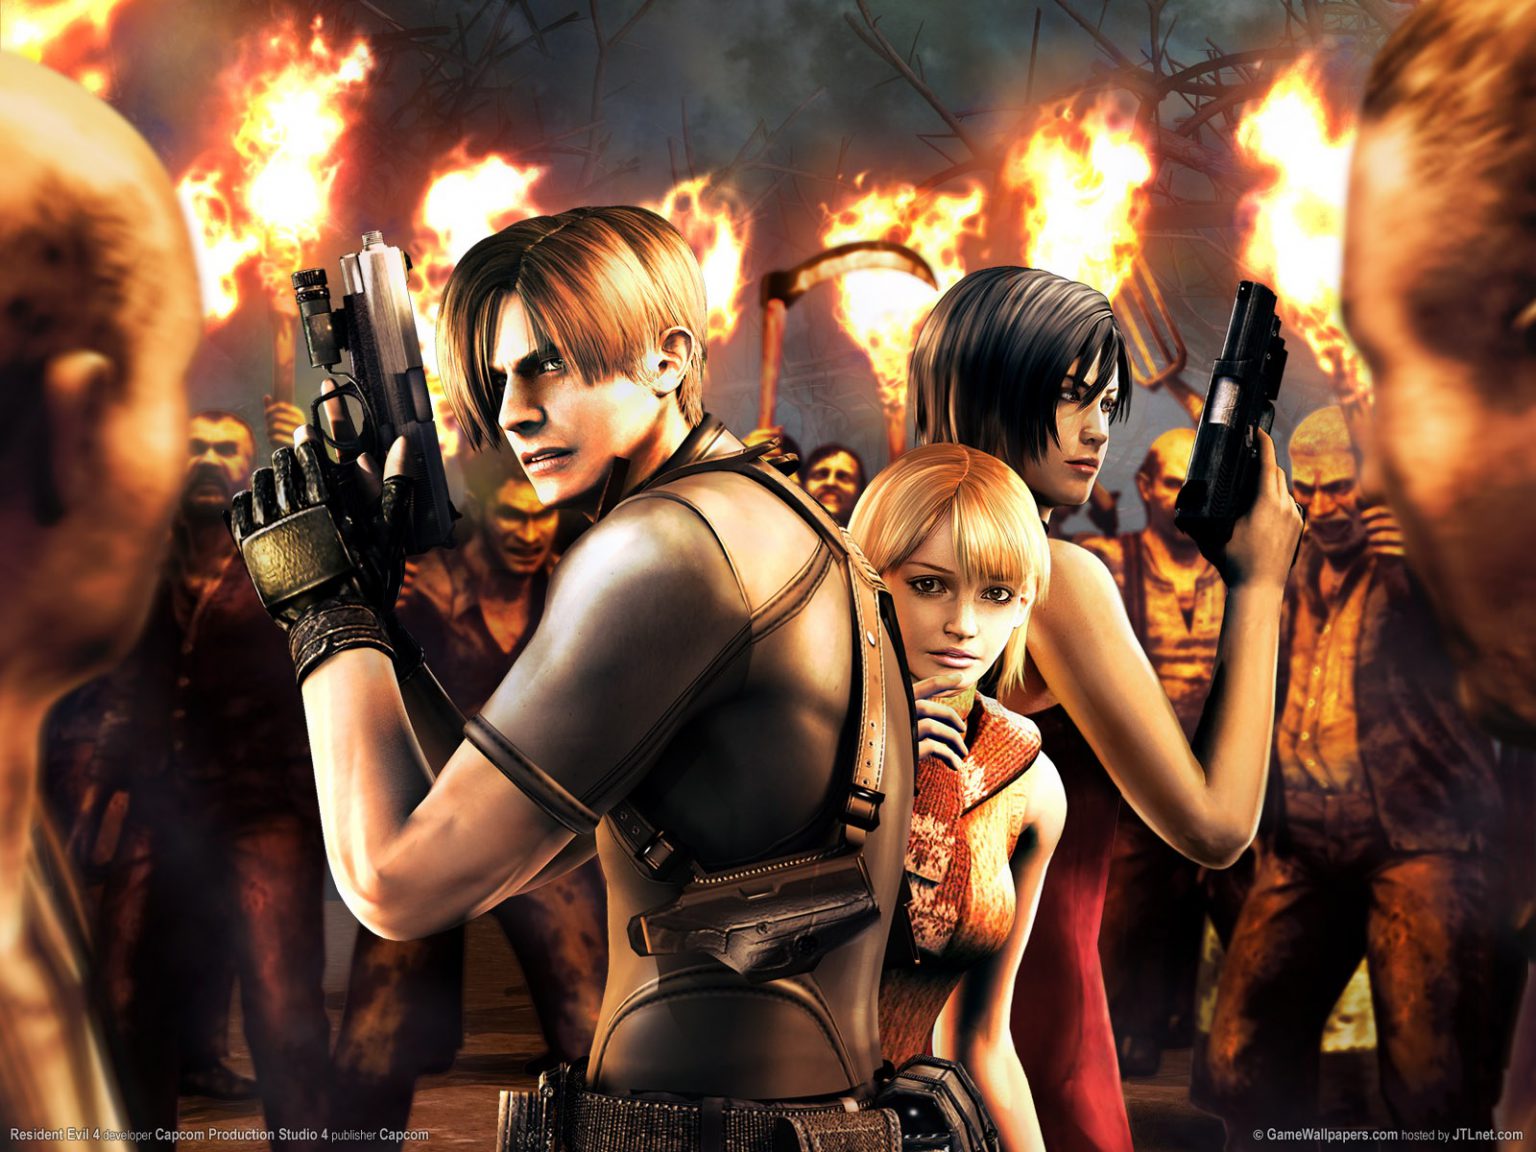 resident evil 4 ultimate hd edition pc download free